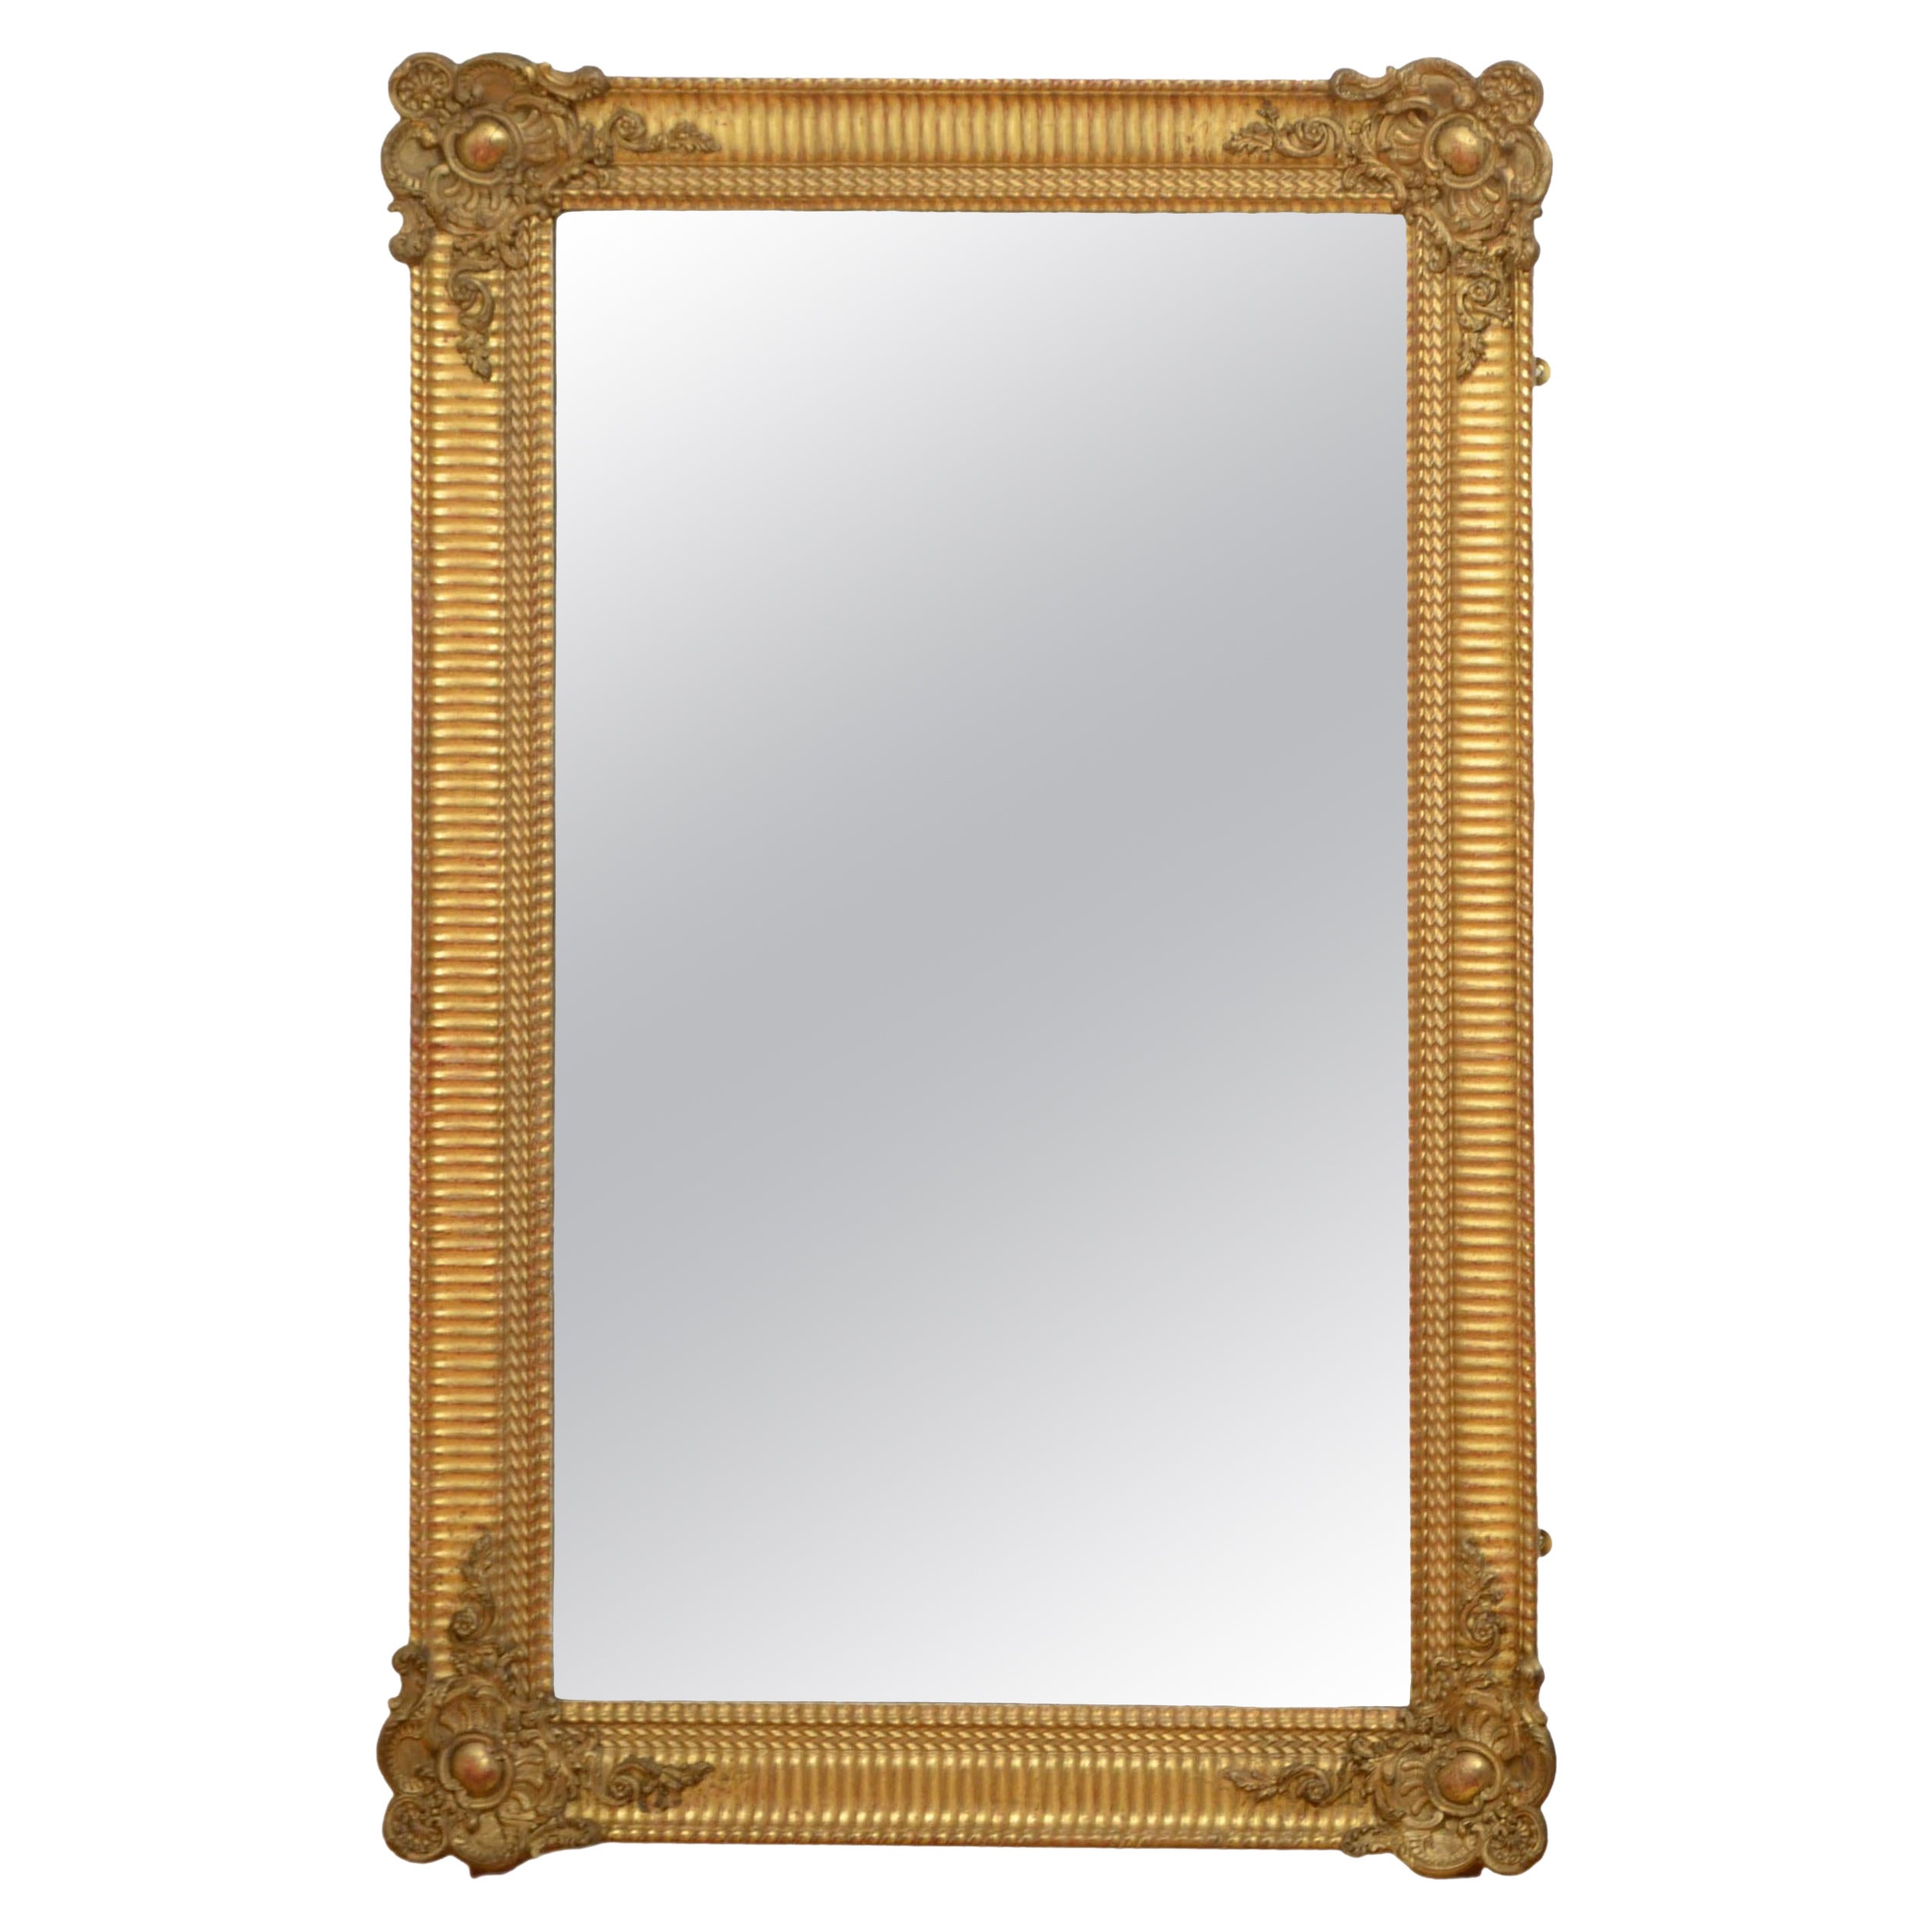 Early 19th Century Giltwood Wall Mirror